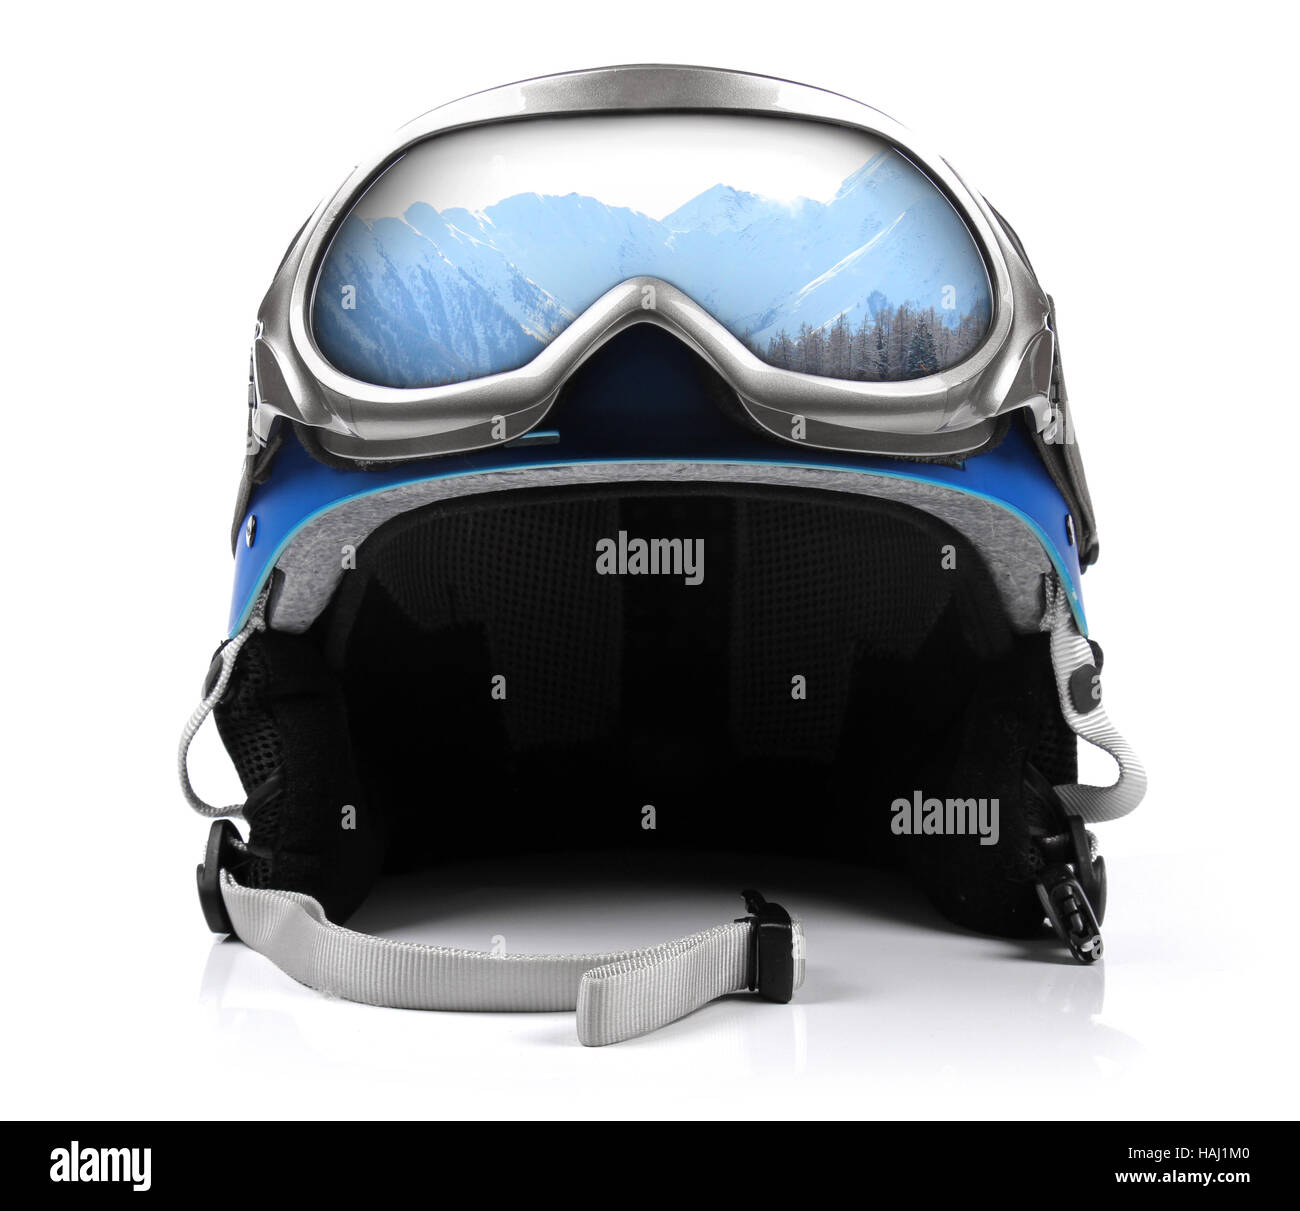 blue snowboard helmet with goggles Stock Photo